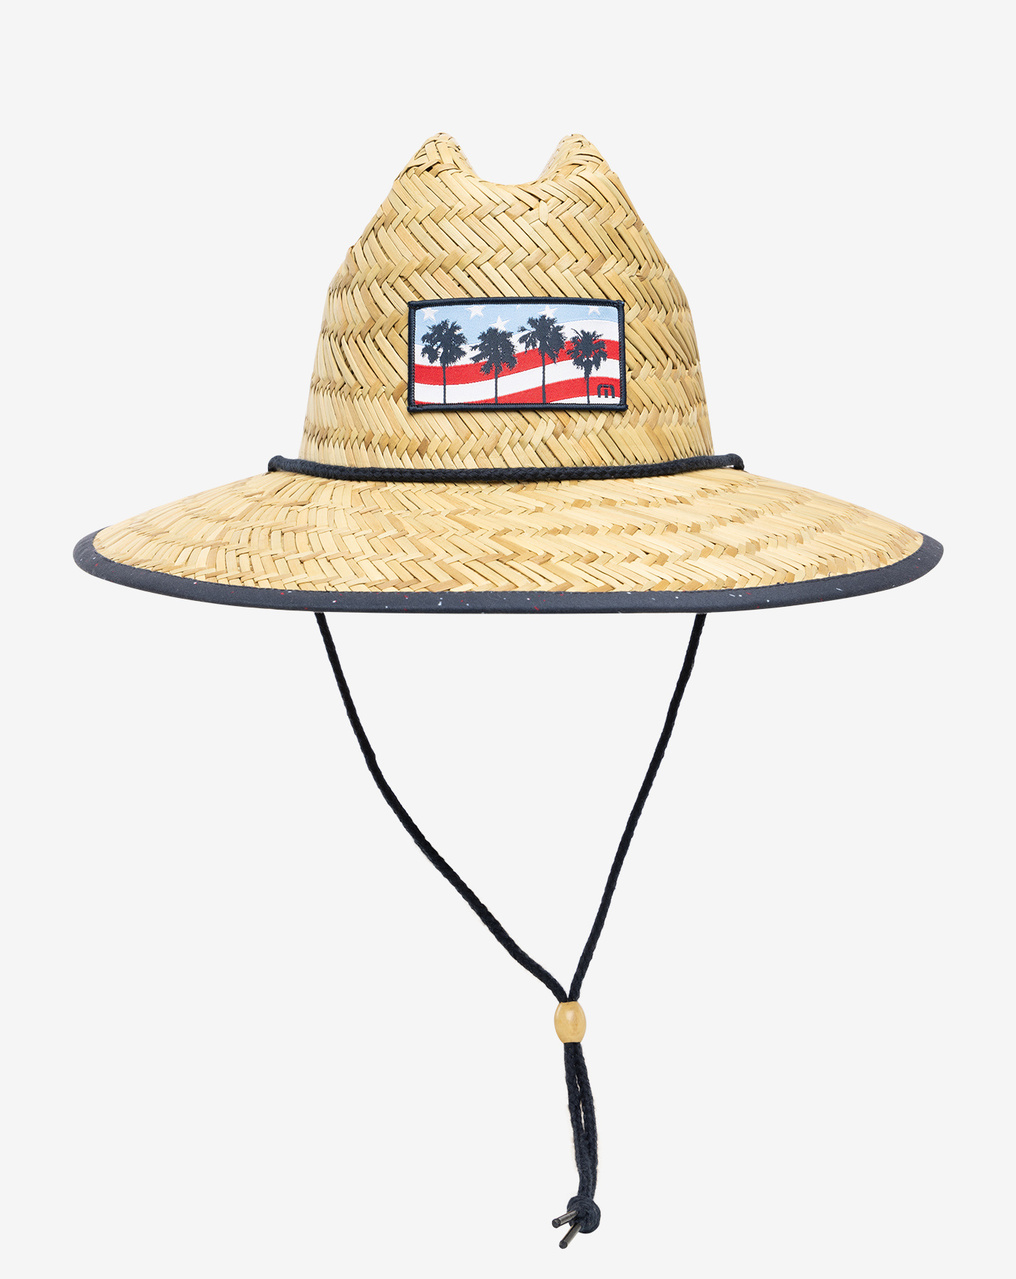 Men's Straw Hats Super Sale up to −50%